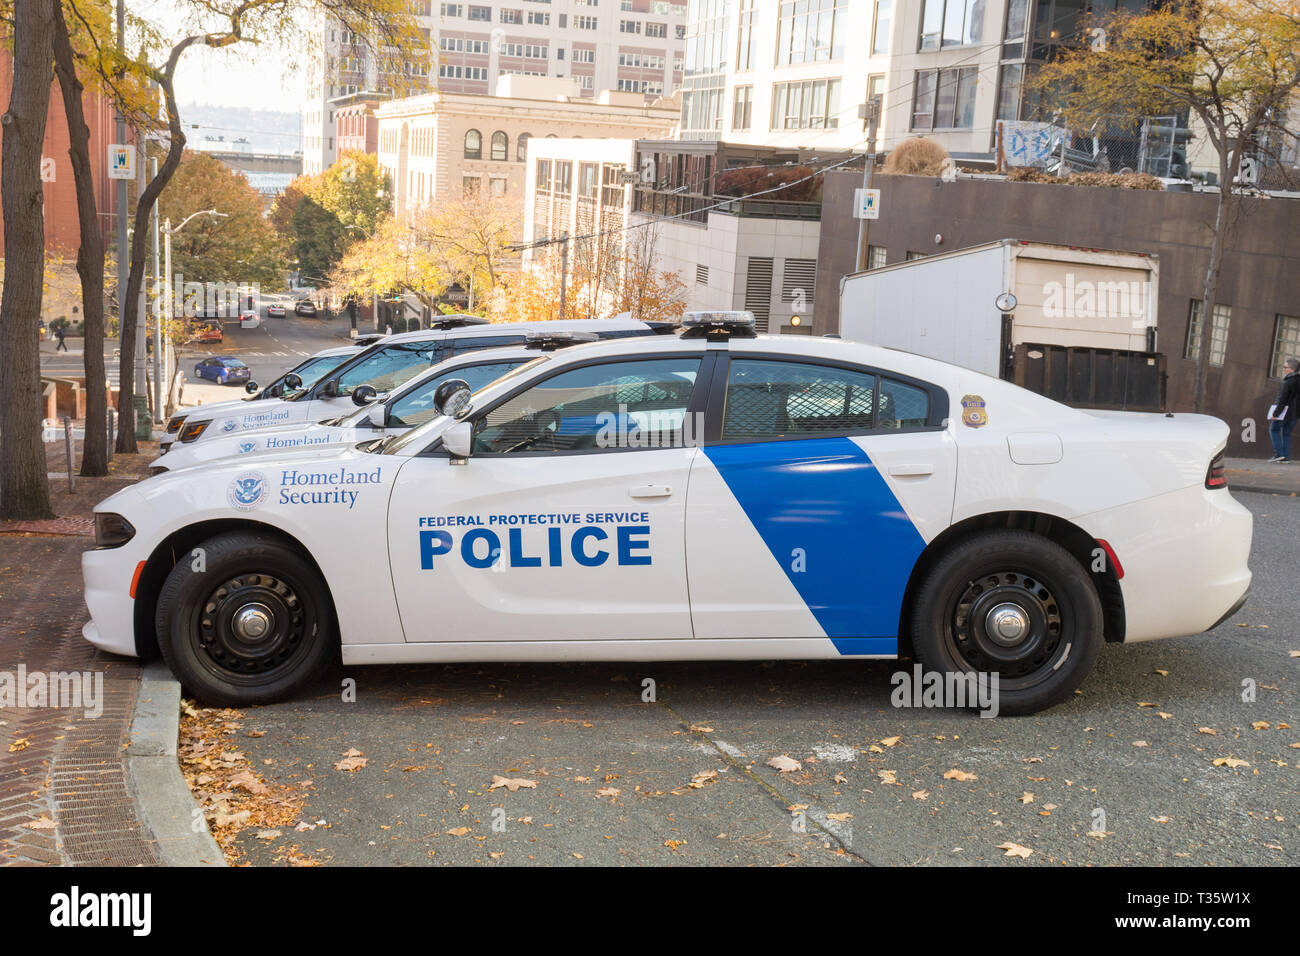 Dodge vehicles from the Federal Protective Service Police in Seattle, Washington, USA. Stock Photo